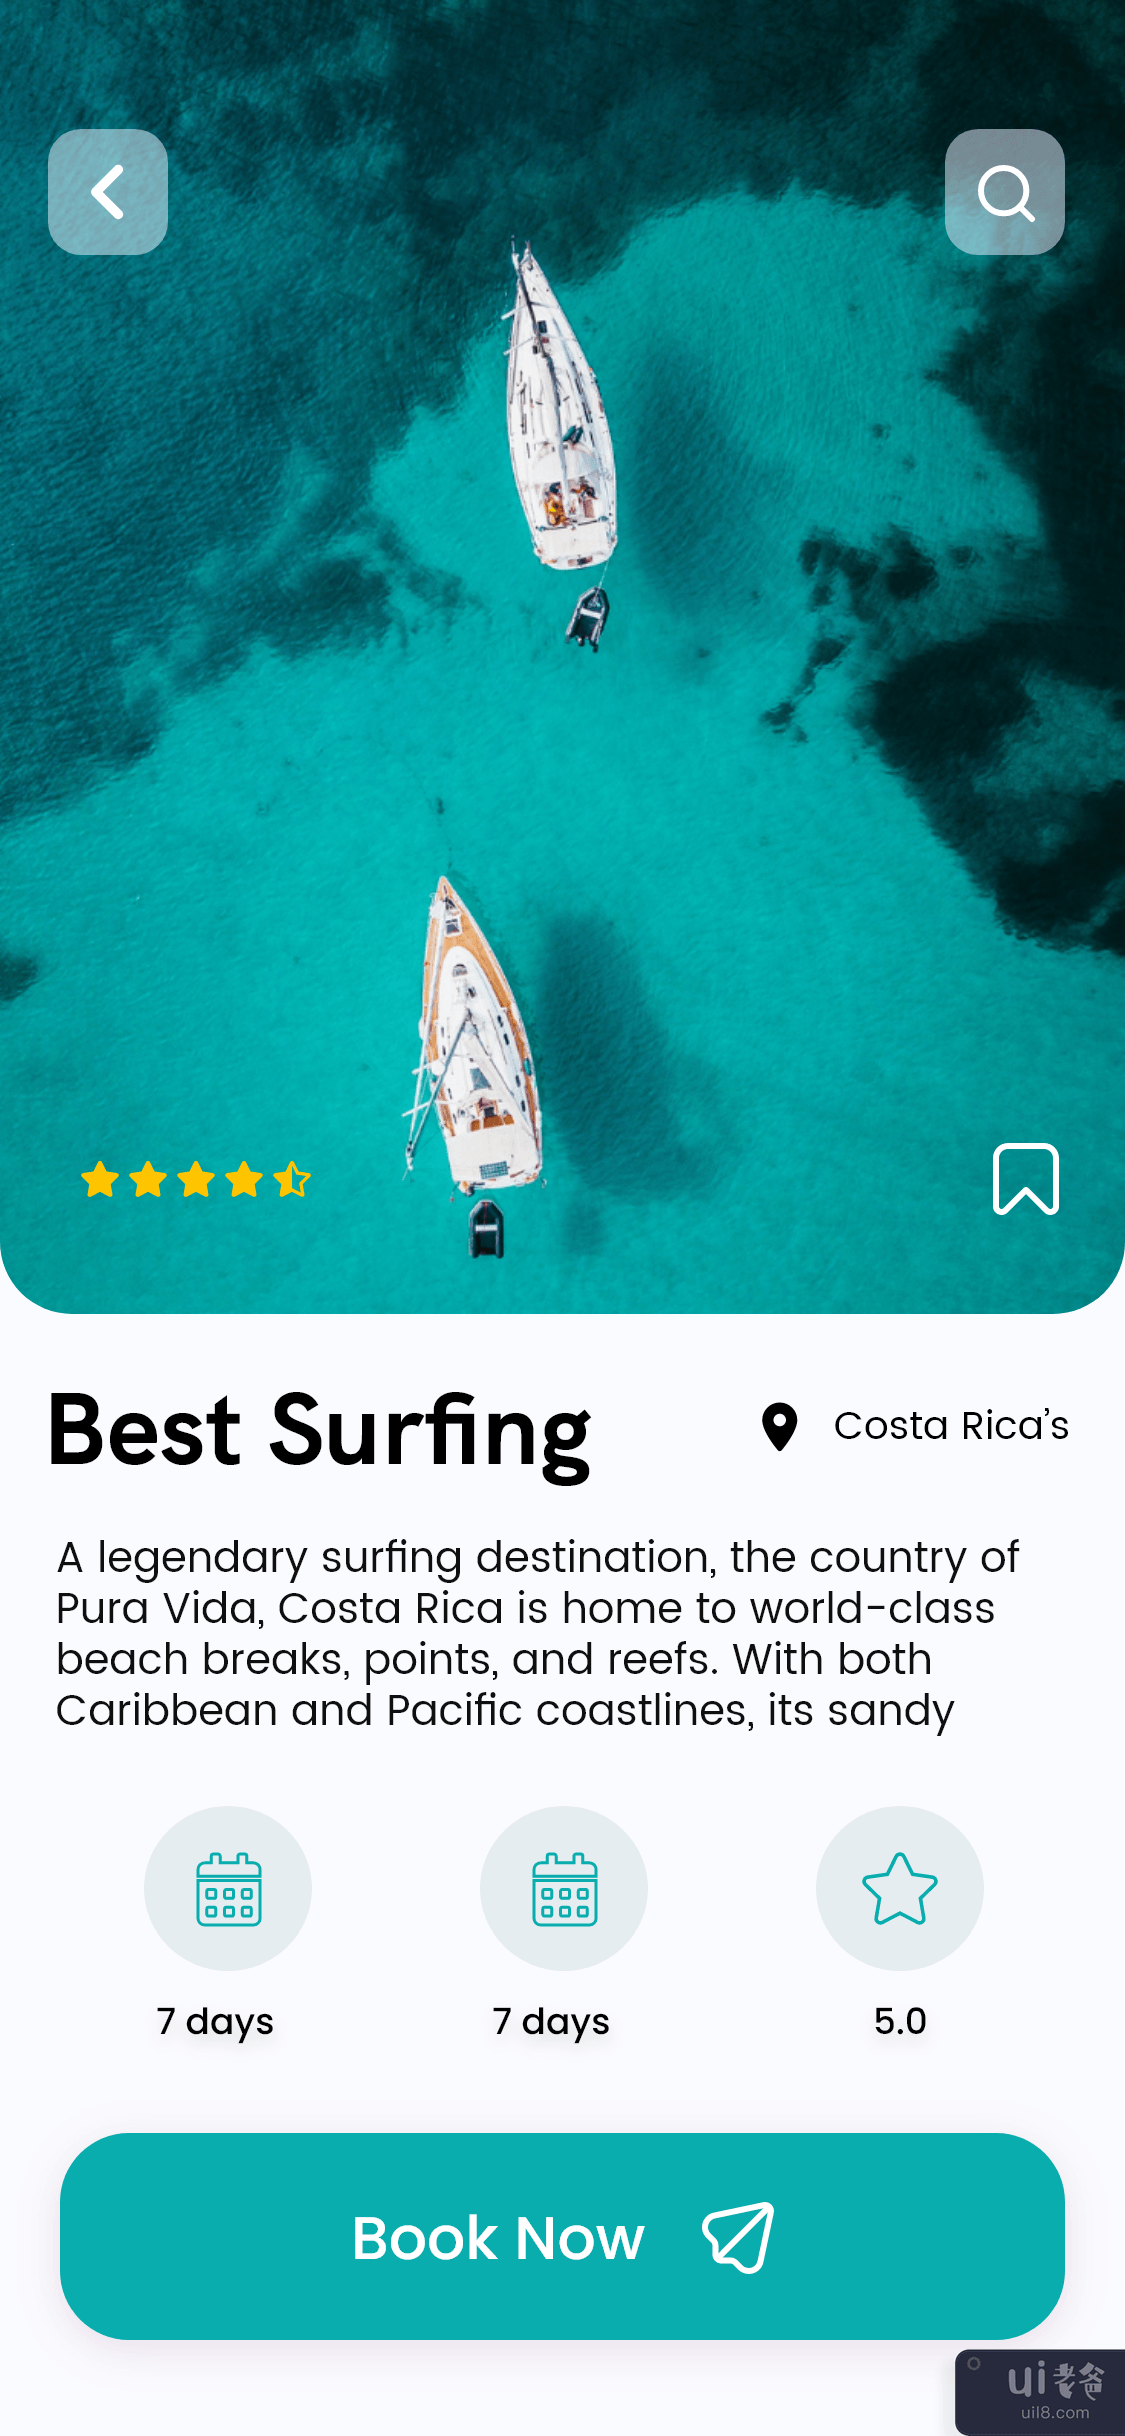 Water Surfing V6 - Travel App UI 设计理念 - 酒店预订应用(Water Surfing V6 - Travel App UI Design Concept - Hotel Booking app)插图